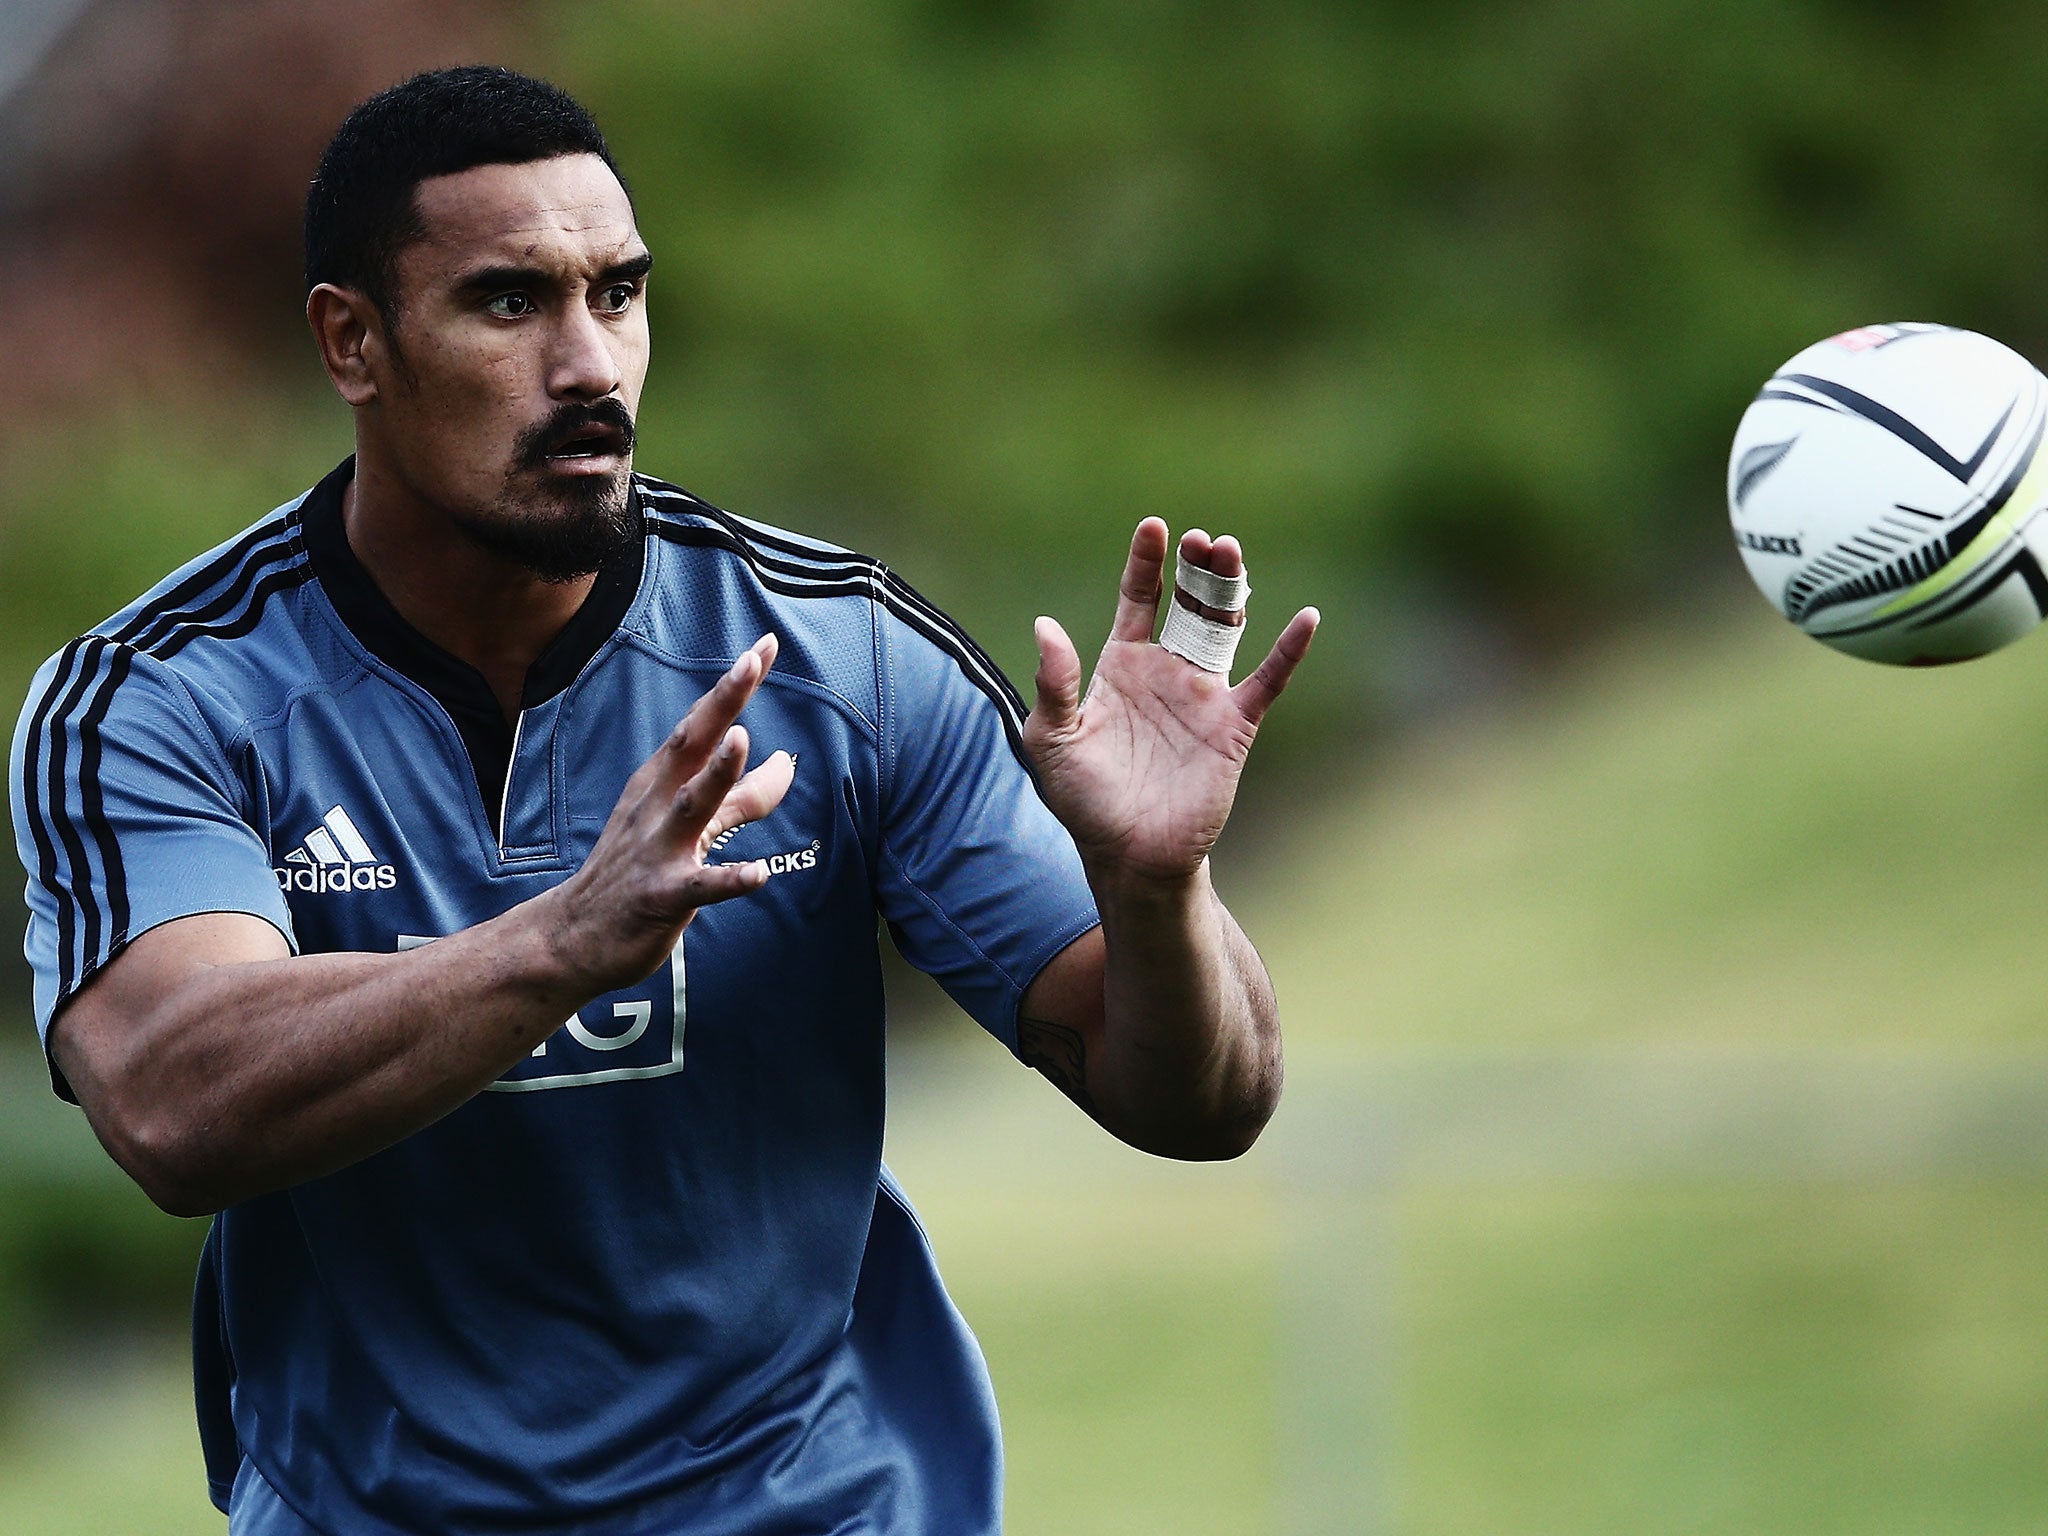 New Zealand flanker Jerome Kaino will return to the All Blacks squad for the first Test against England